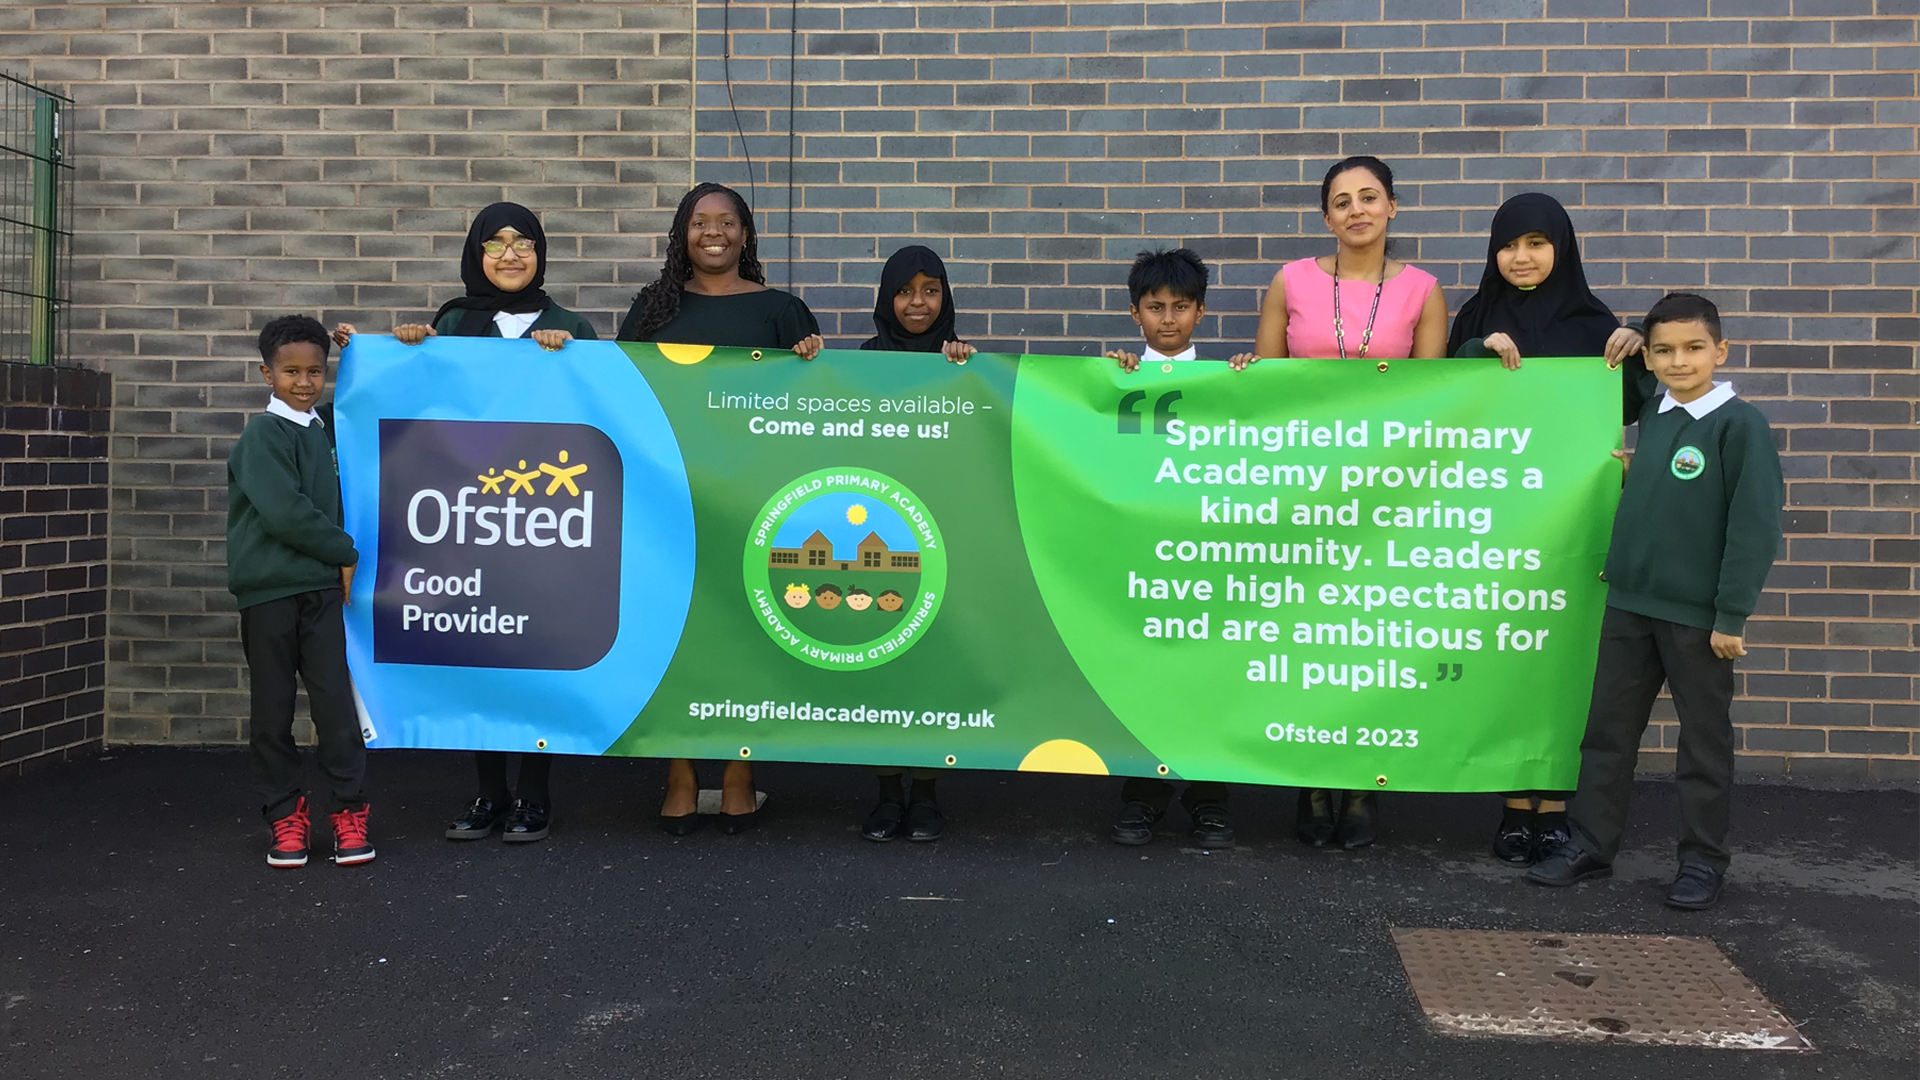 A photo of the children and staff at Springfield Academy holding a banner with a quote from the recent Ofsted Inspection which states "Springfield Primary Academy provides a kind and caring community. Leaders have high expectations and are ambitious for all pupils."